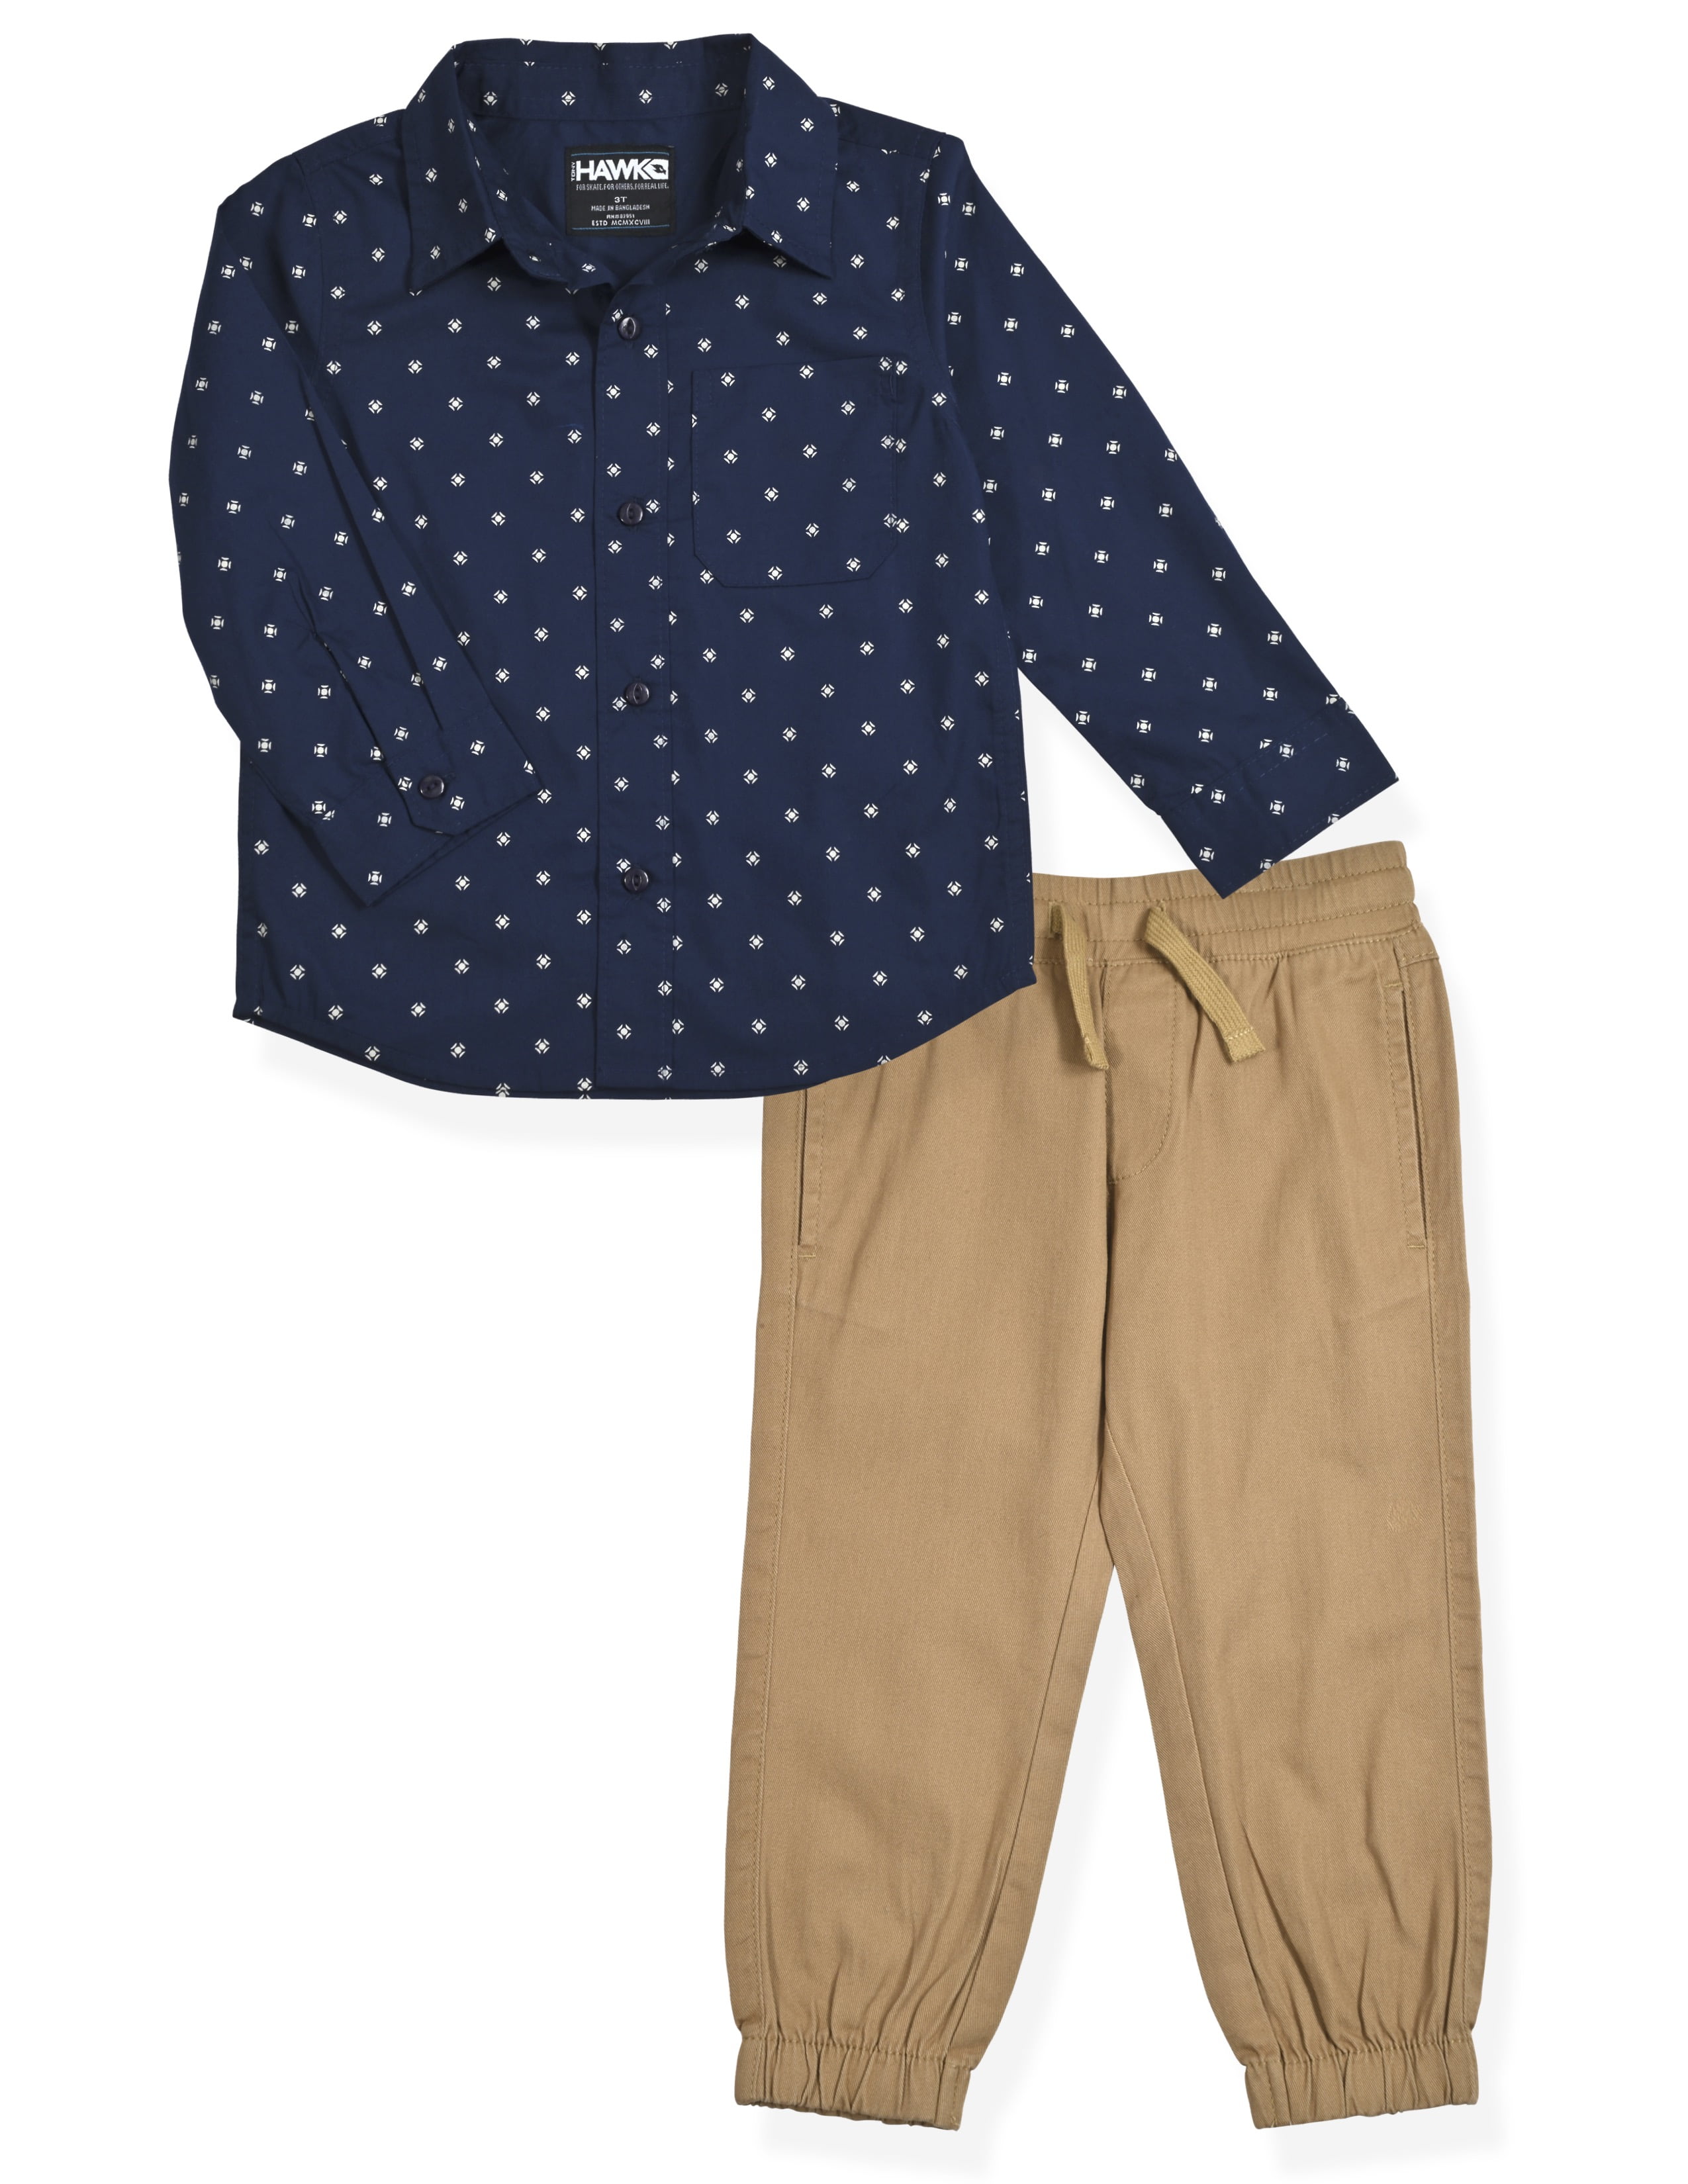 Tony Hawk Boys Printed Long Sleeve Button Down Shirt and Jogger Pant 2 Piece Outfit Set, Sizes 4-12 - Walmart.com